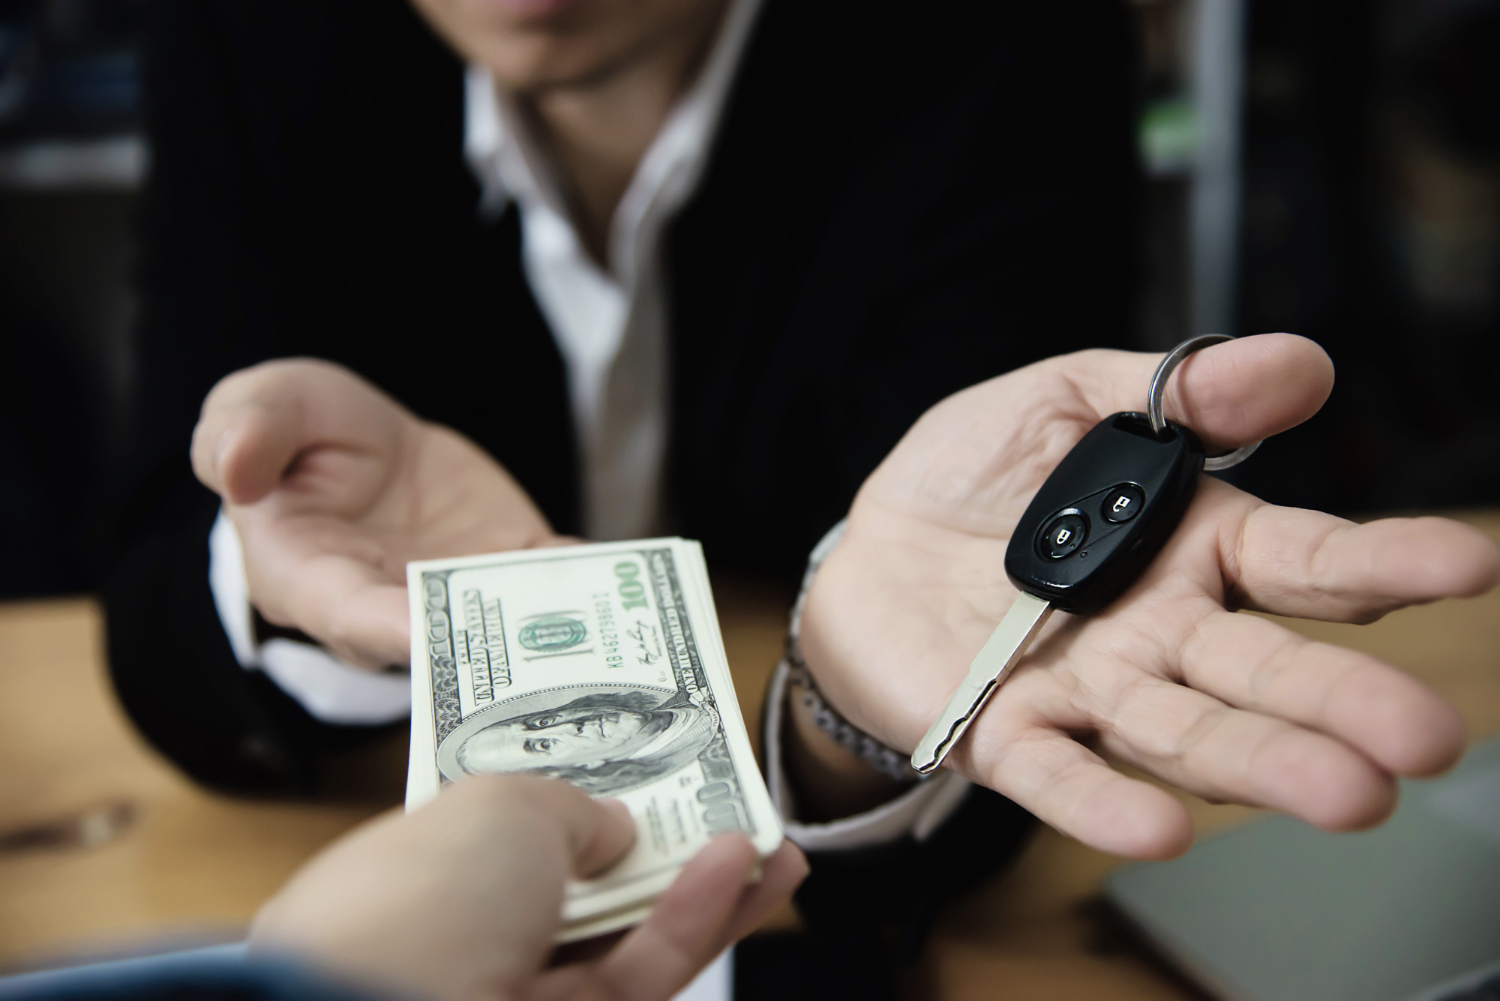 A car can be pretty expensive, so pay attention to these tips before getting a car loan. Source: Freepik.